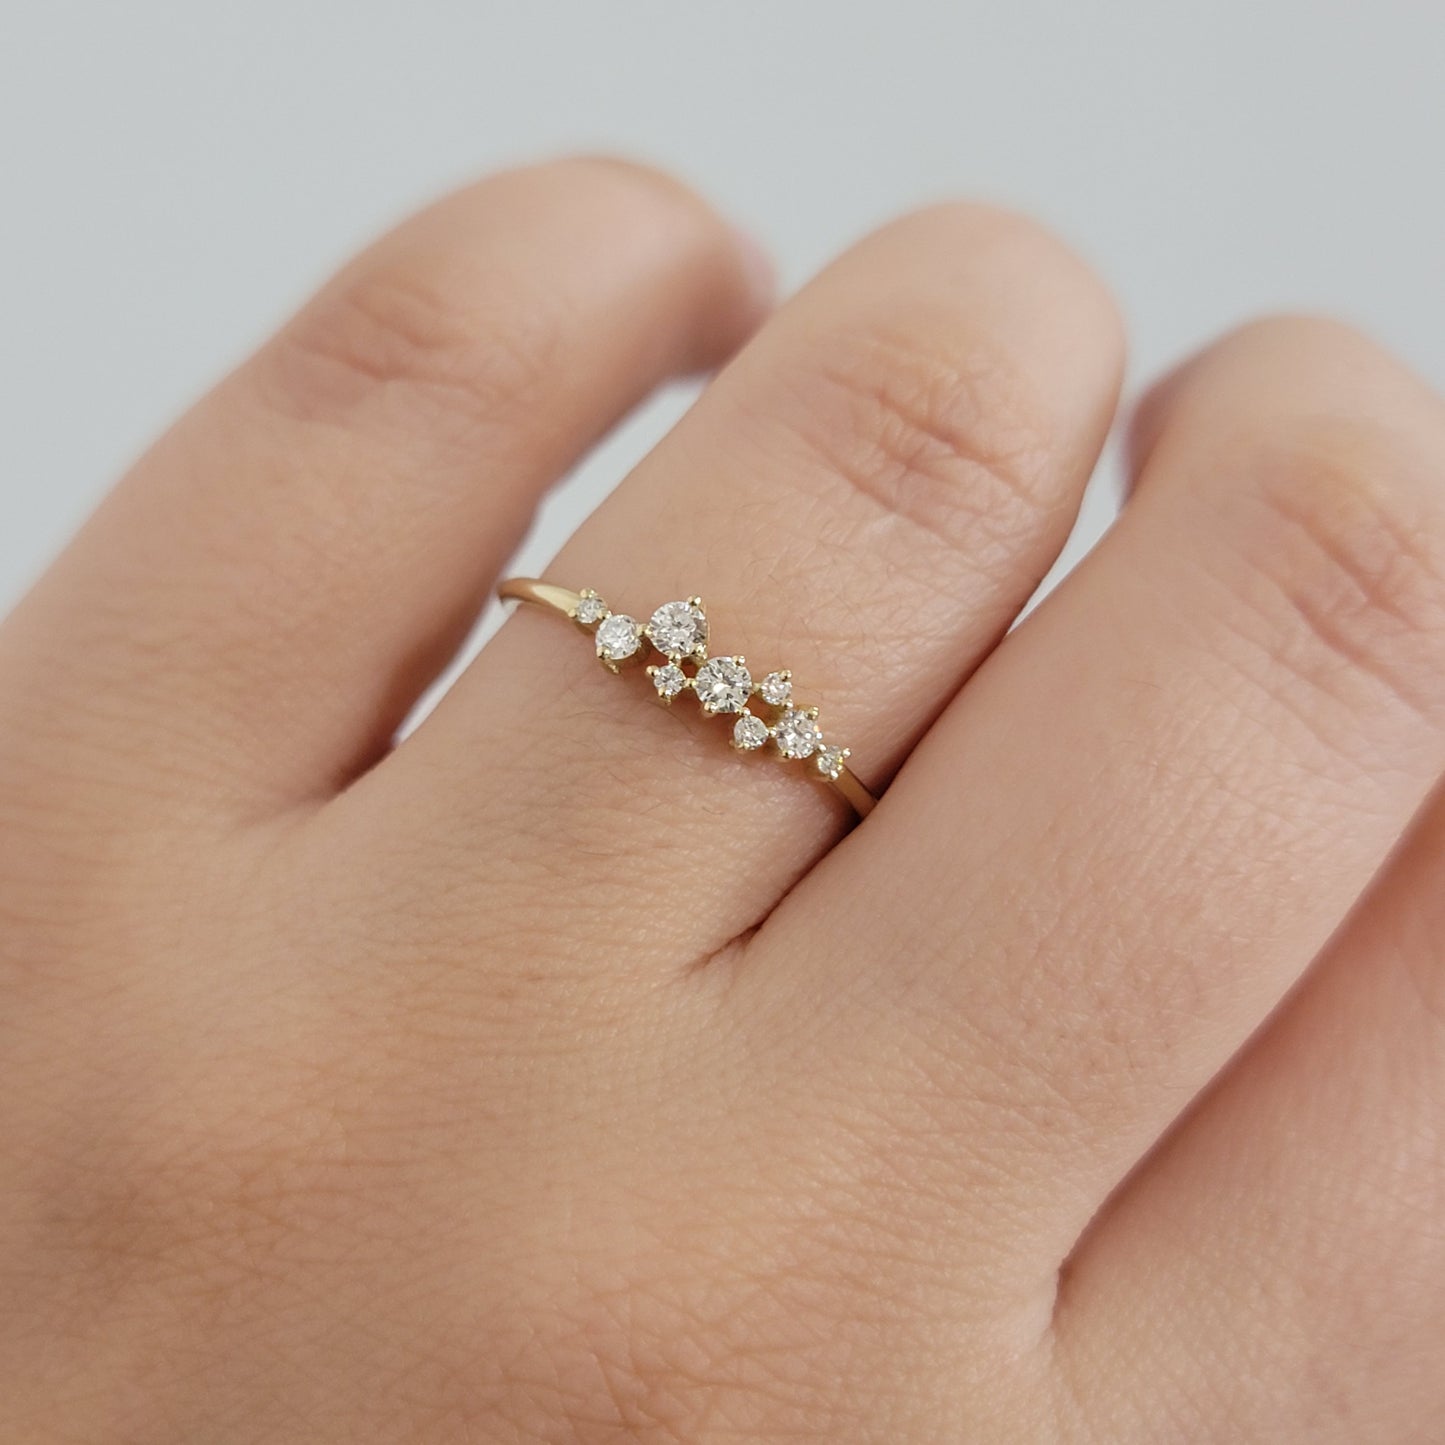 Diamond Ring, 14k Gold and Diamond Ring, Anniversary Ring, Diamond Gold Ring for Women, Diamond Cluster Ring, Wedding Ring, Stackable Rings